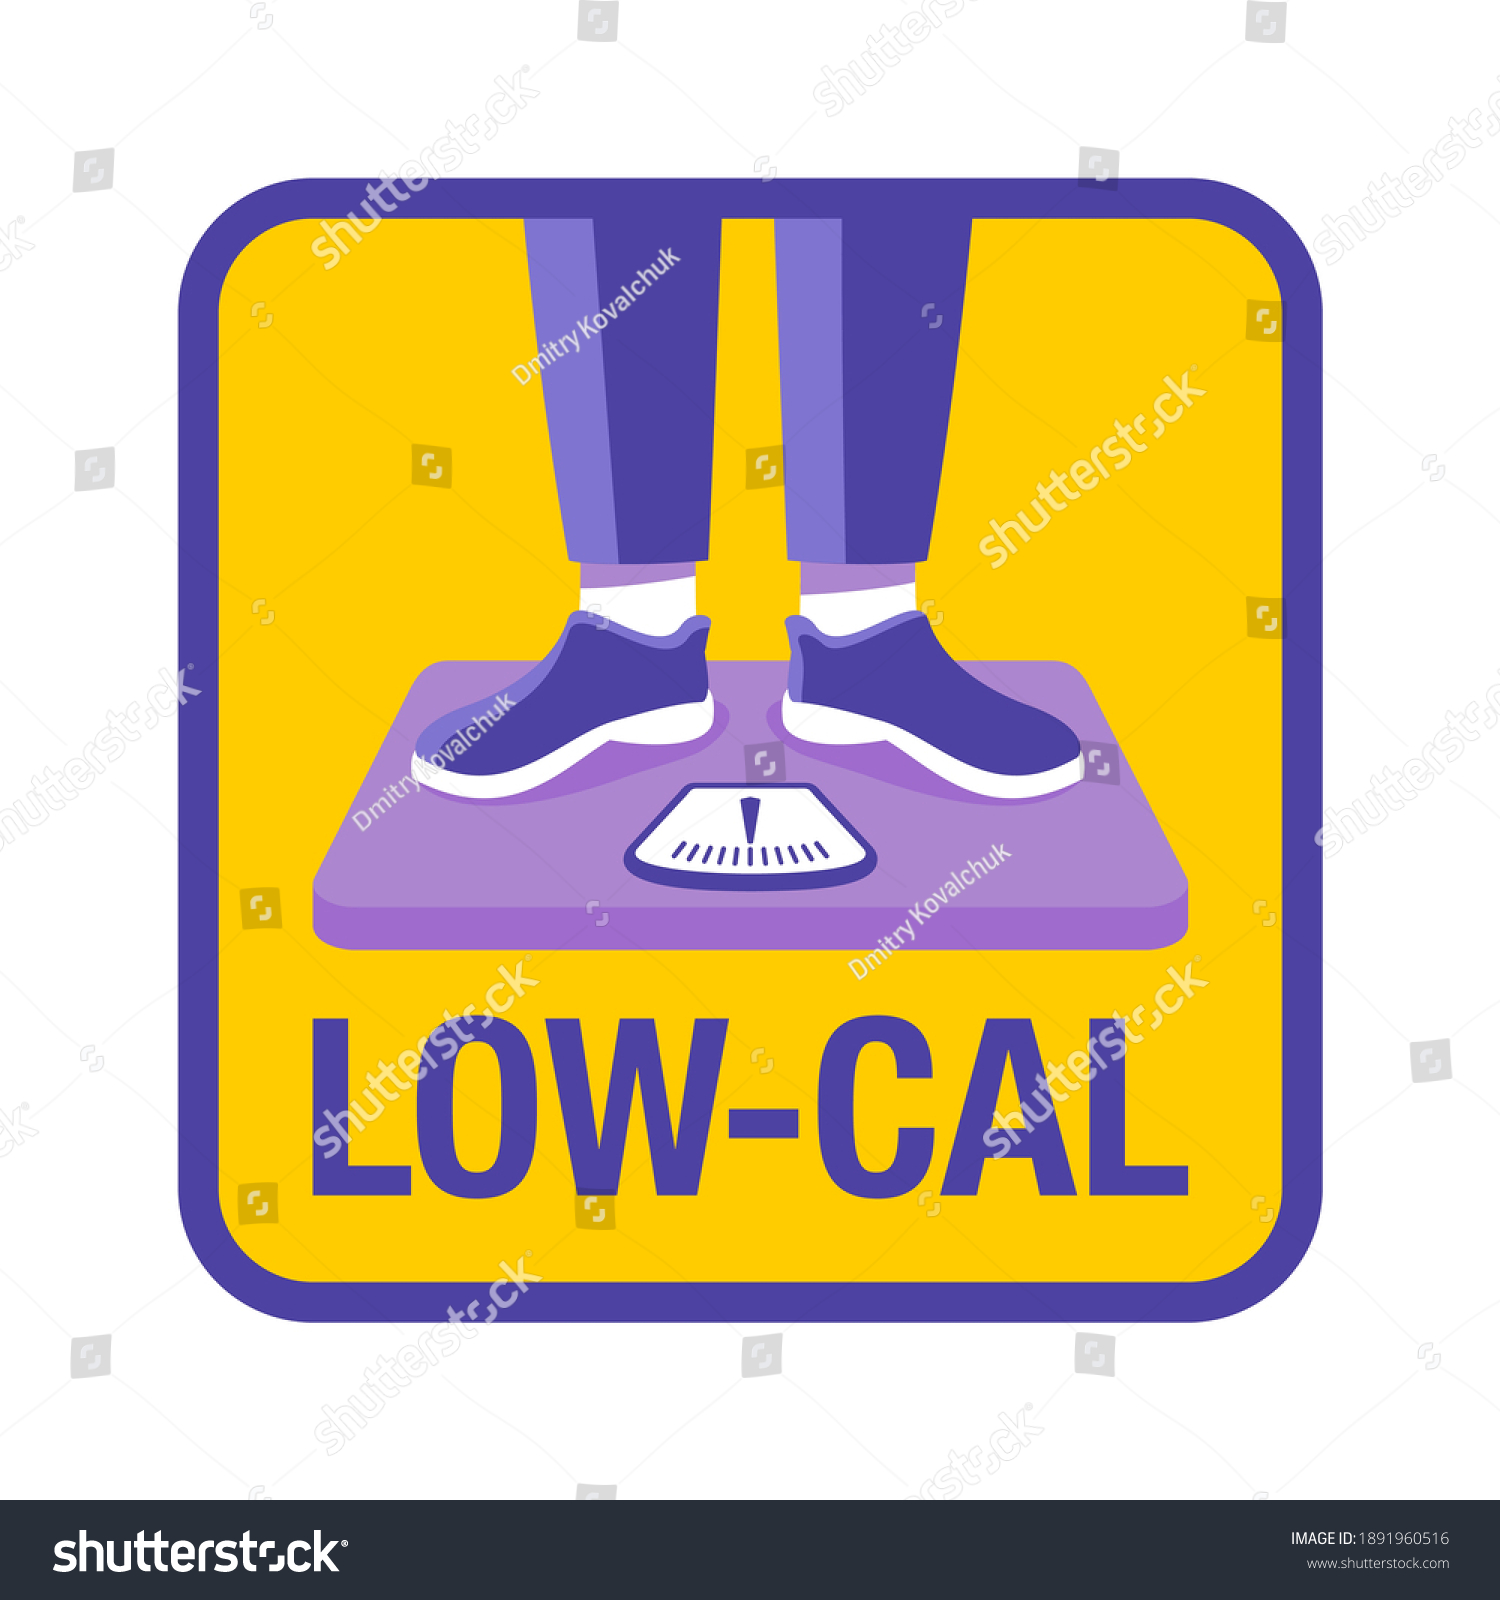 SVG of Low Cal icon - pictogram for dietary low-cal food products - woman standing on weight scales, isolated vector emblem svg